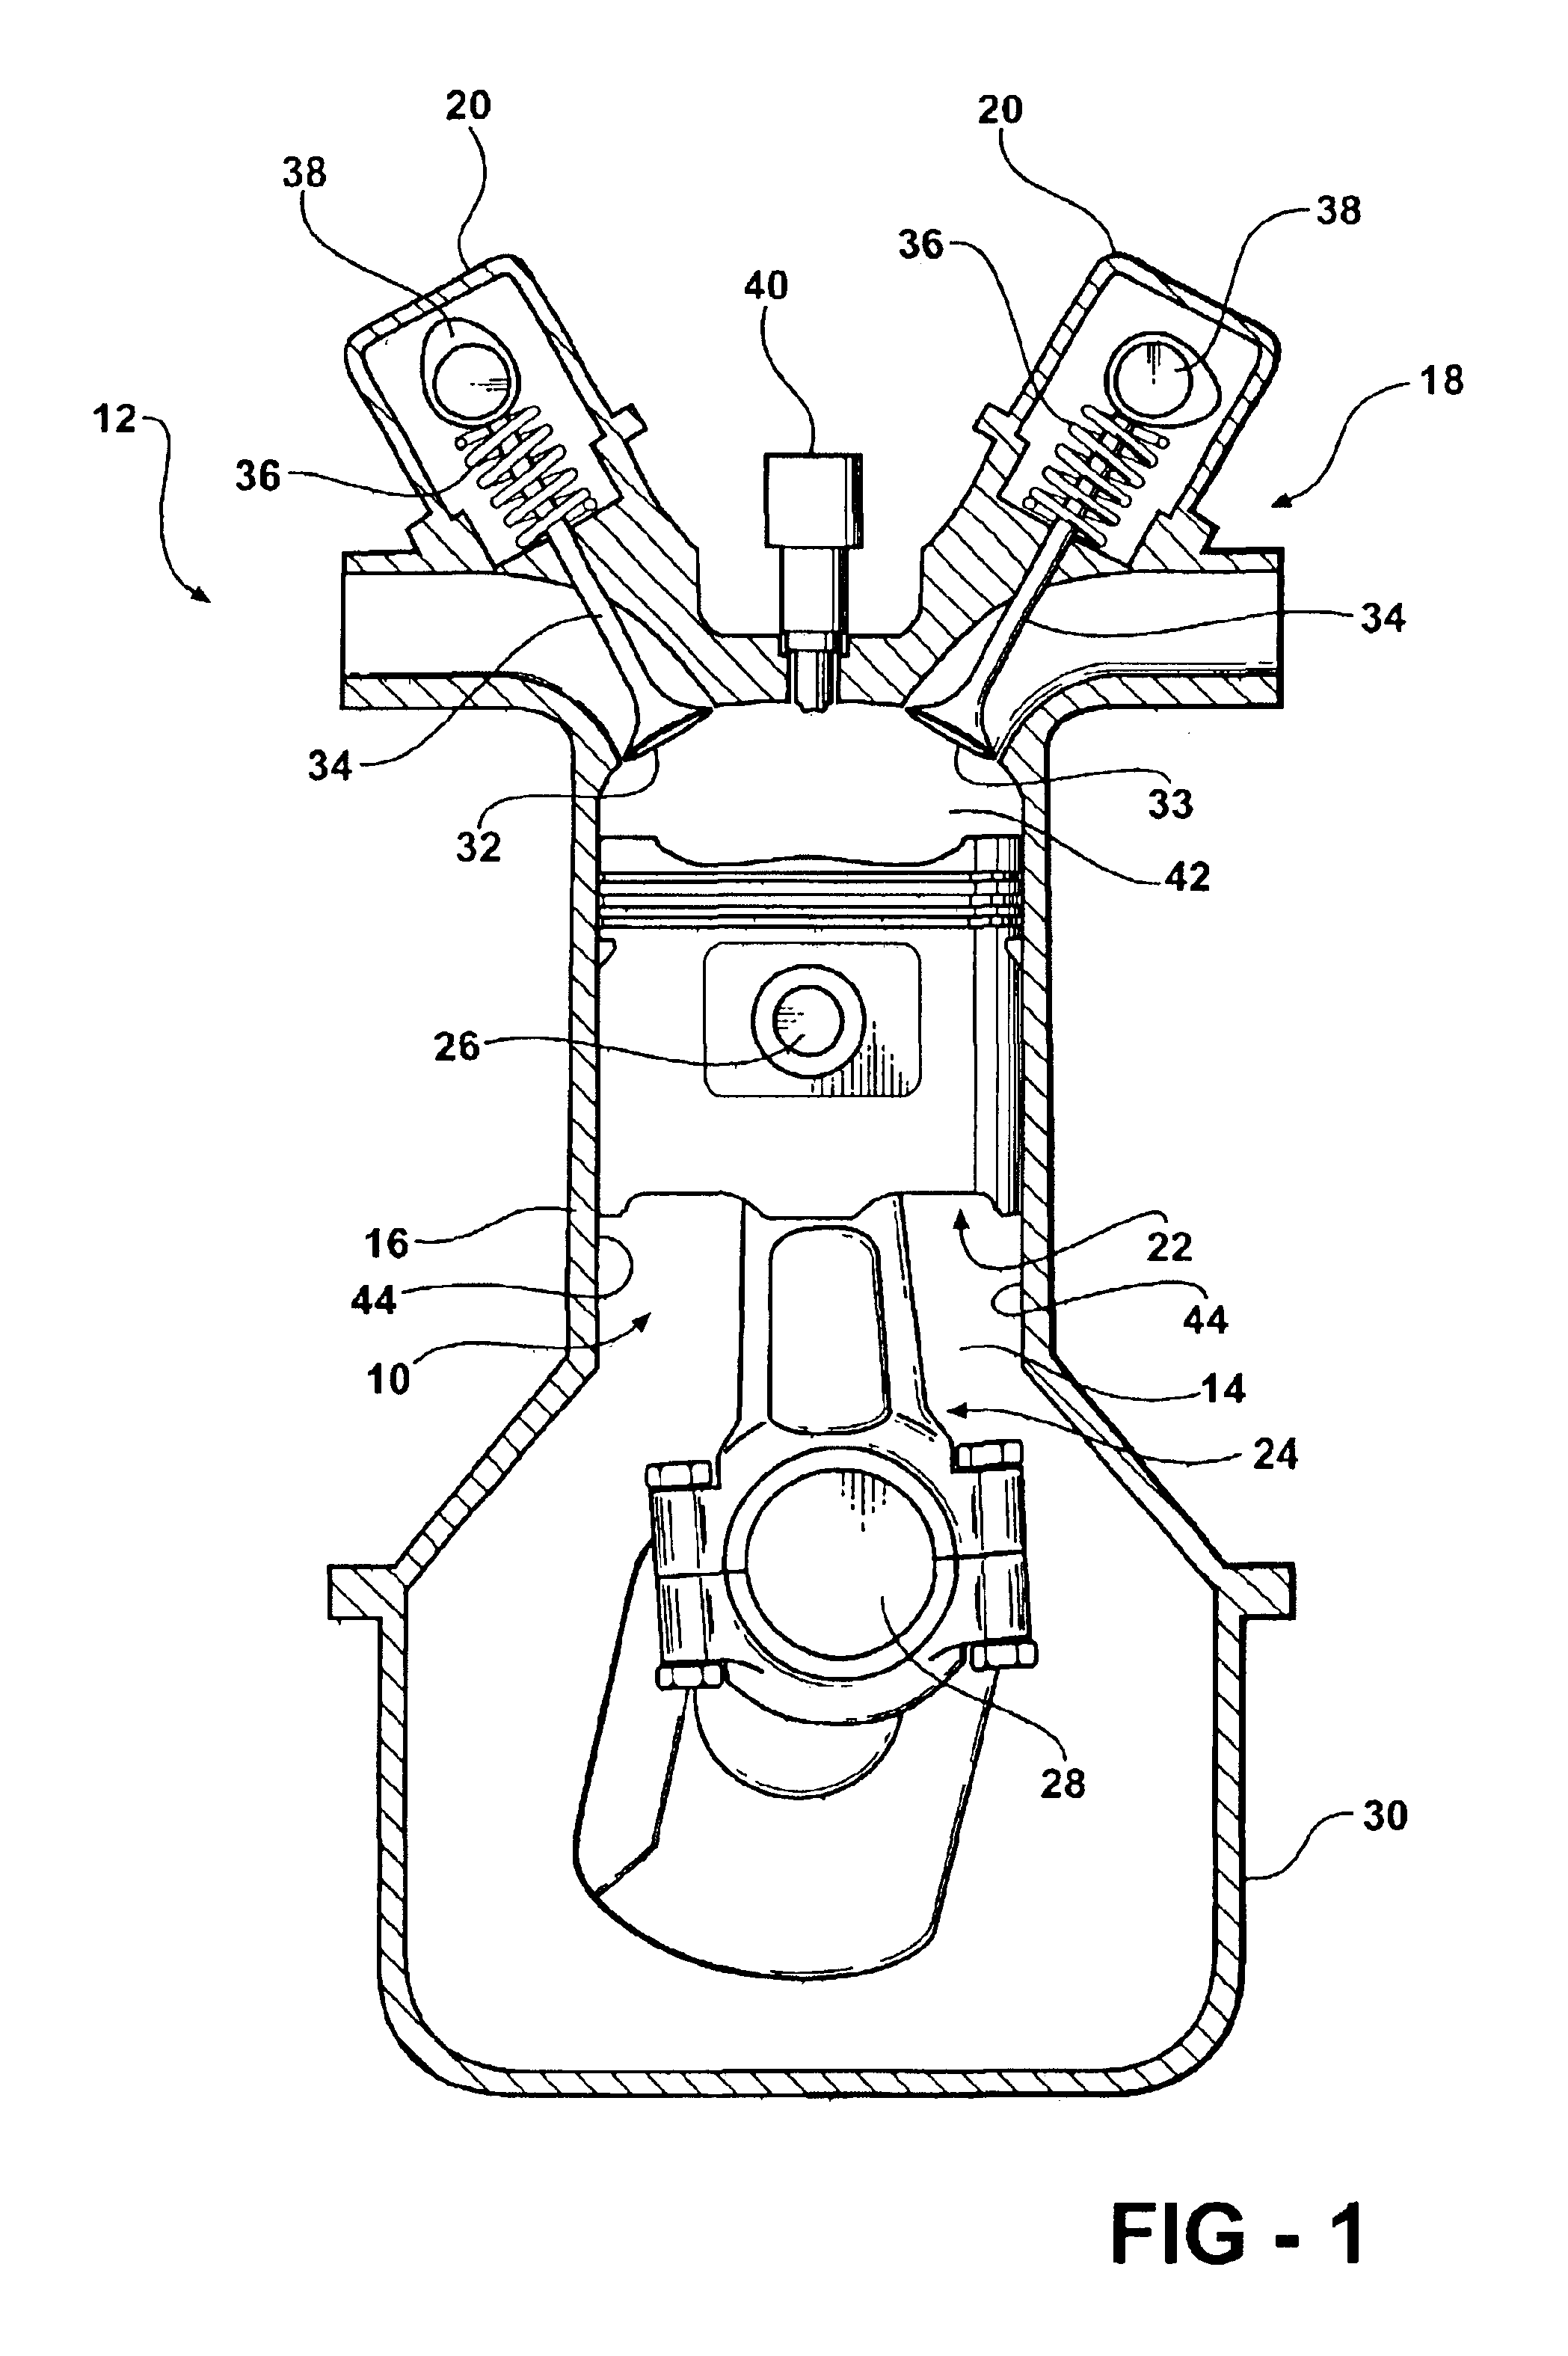 Piston and connecting rod assembly having phosphatized bushingless connecting rod and profiled piston pin